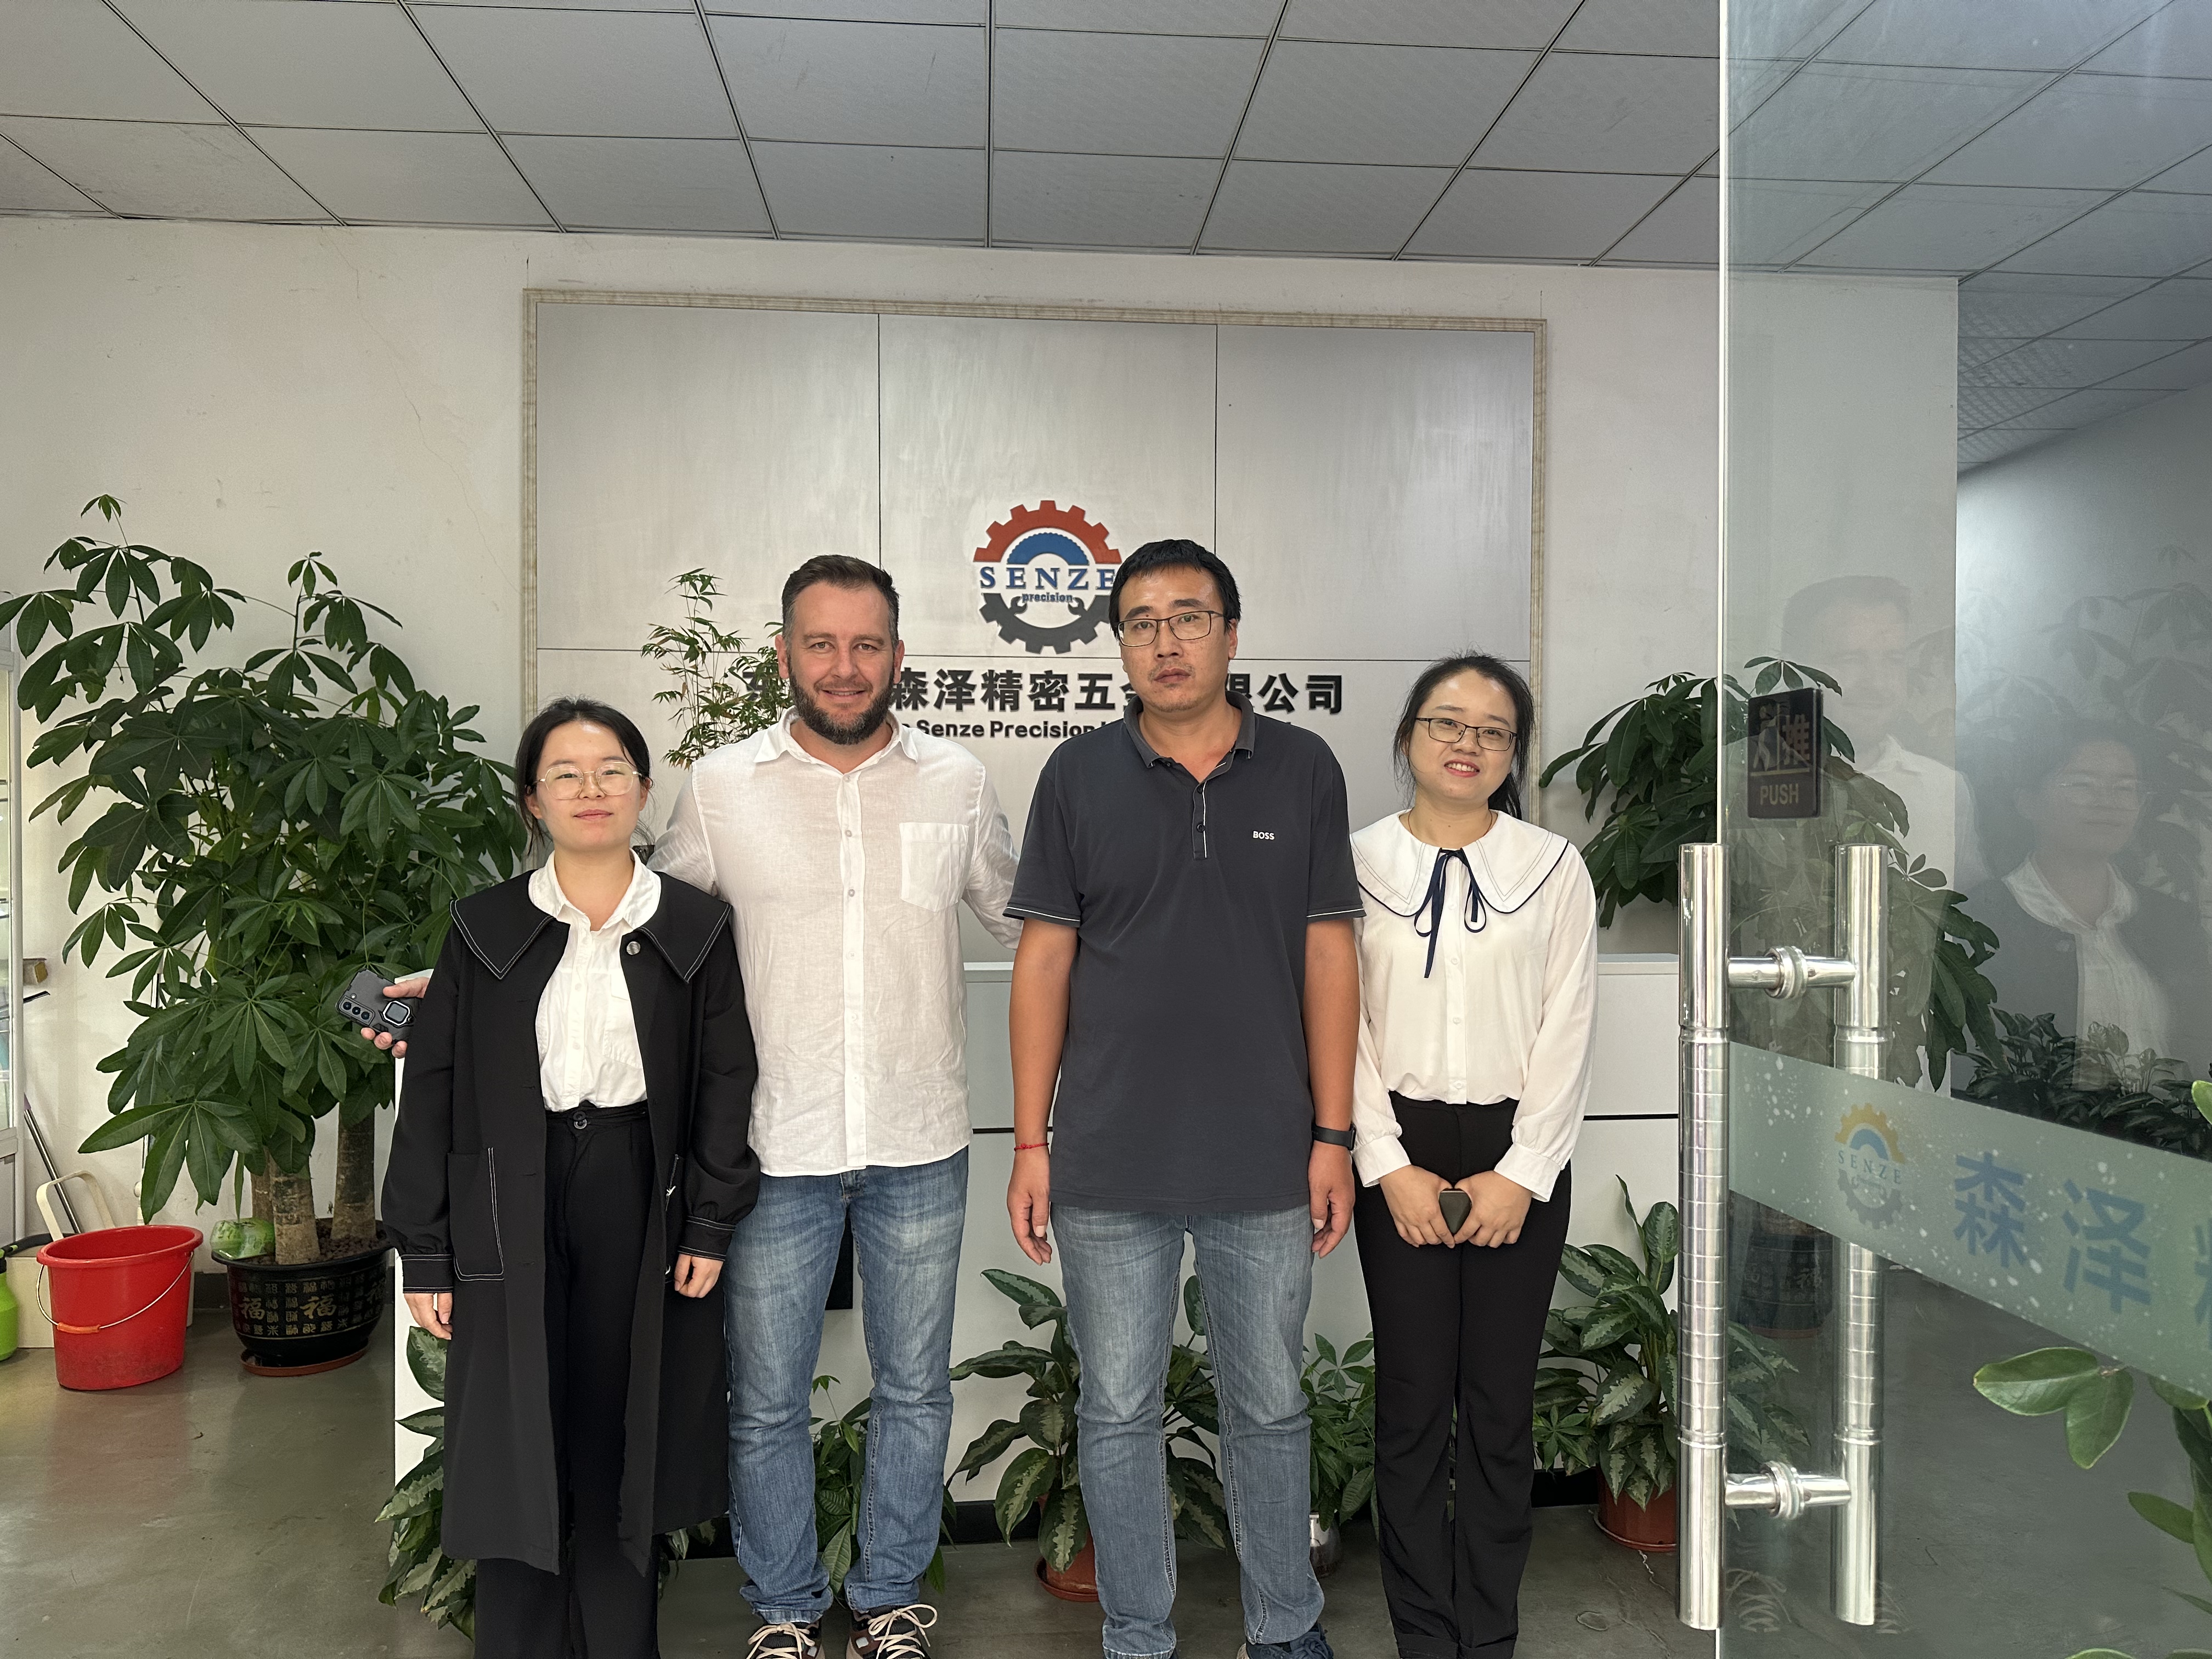 Welcome Our Client To Visit Us!